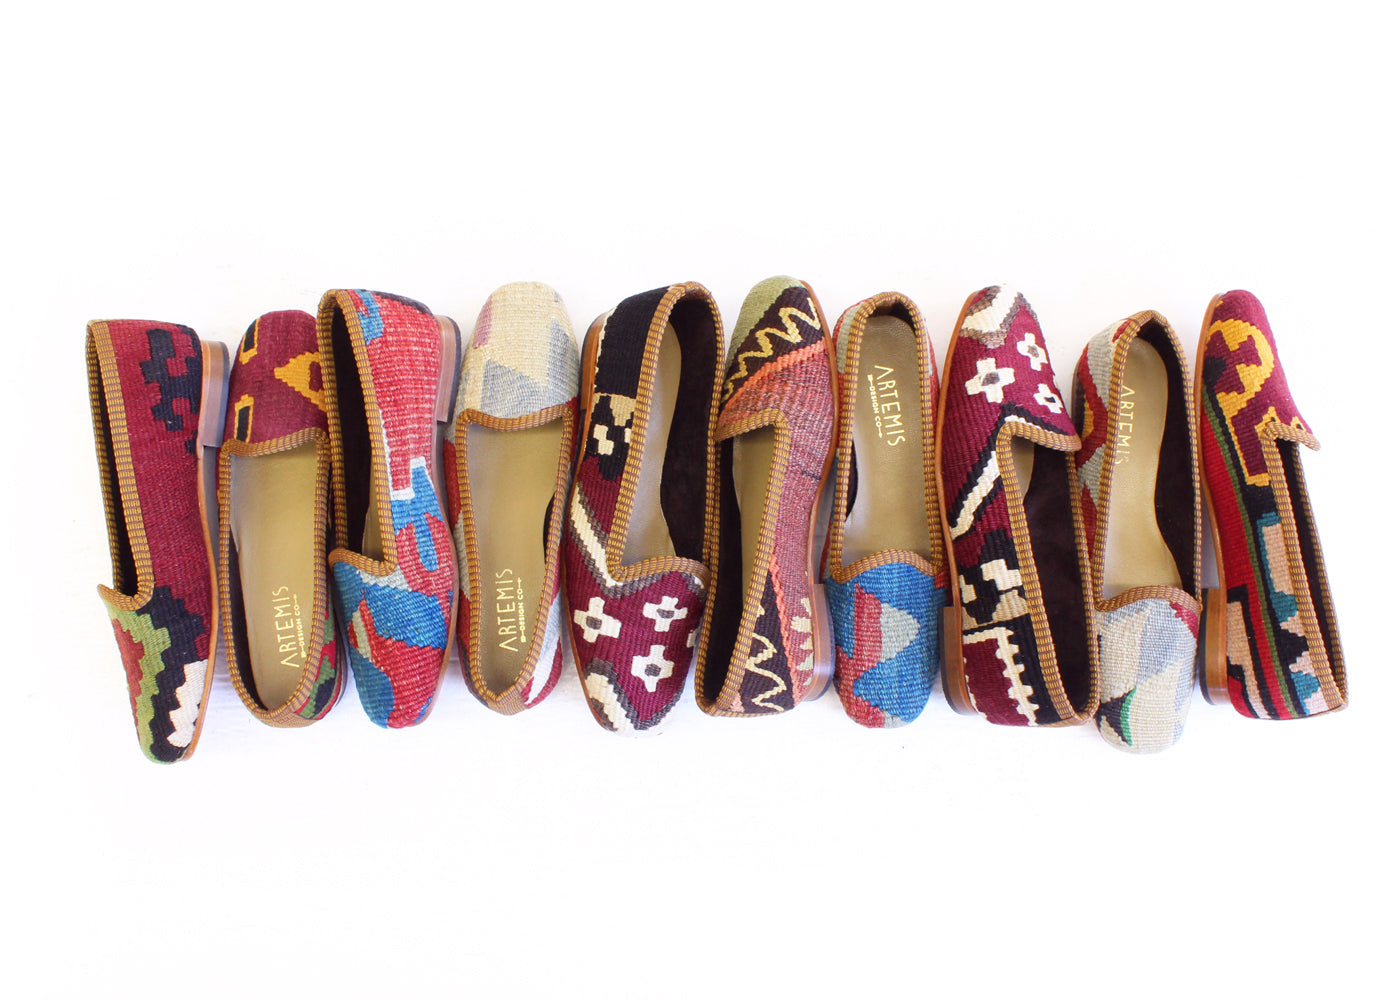 Kilim loafers in multiple patterns from Artemis Design Co